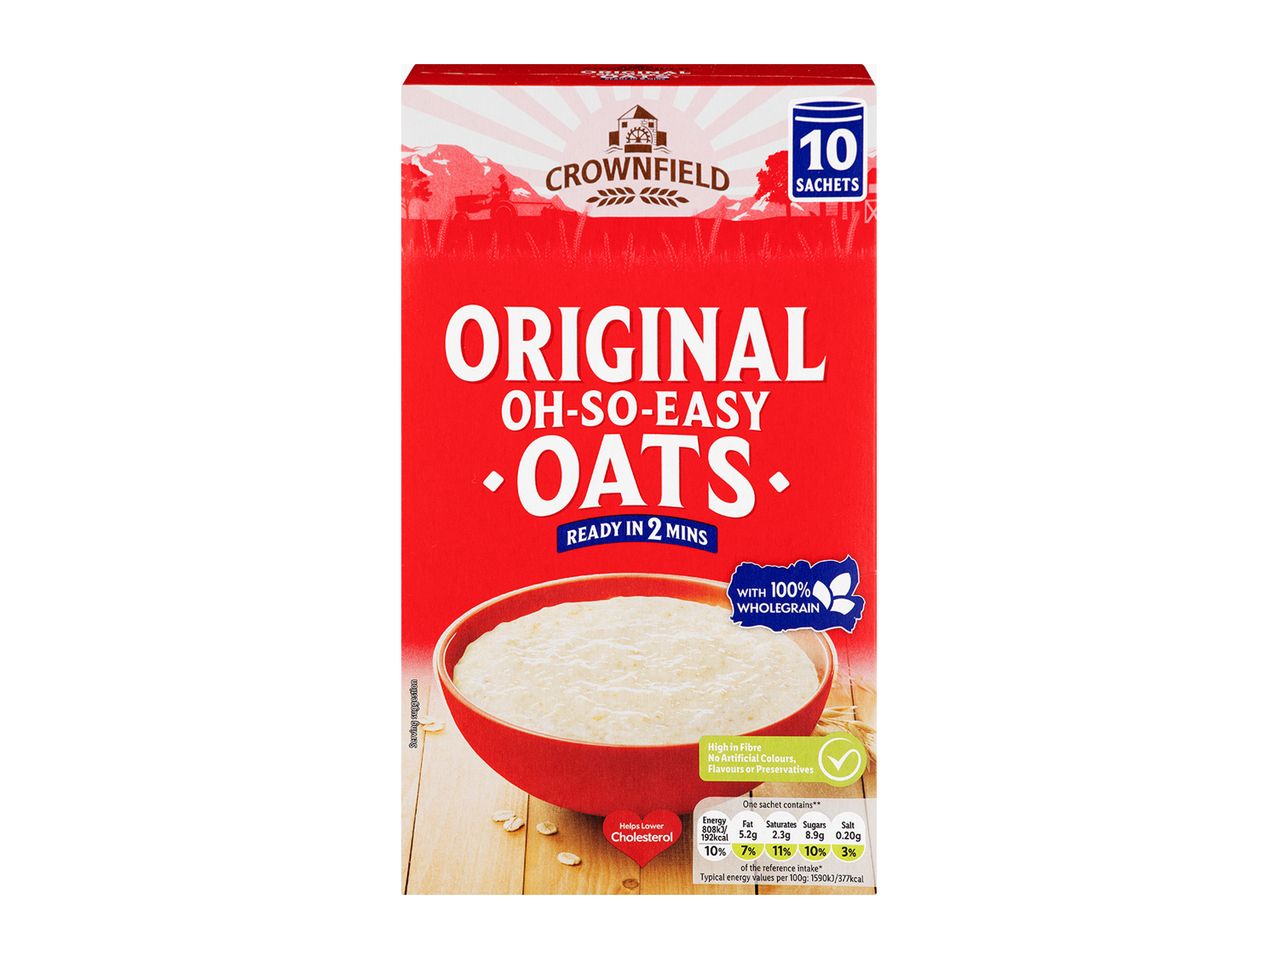 Go to full screen view: Crownfield Original Oats in Sachets - Image 1